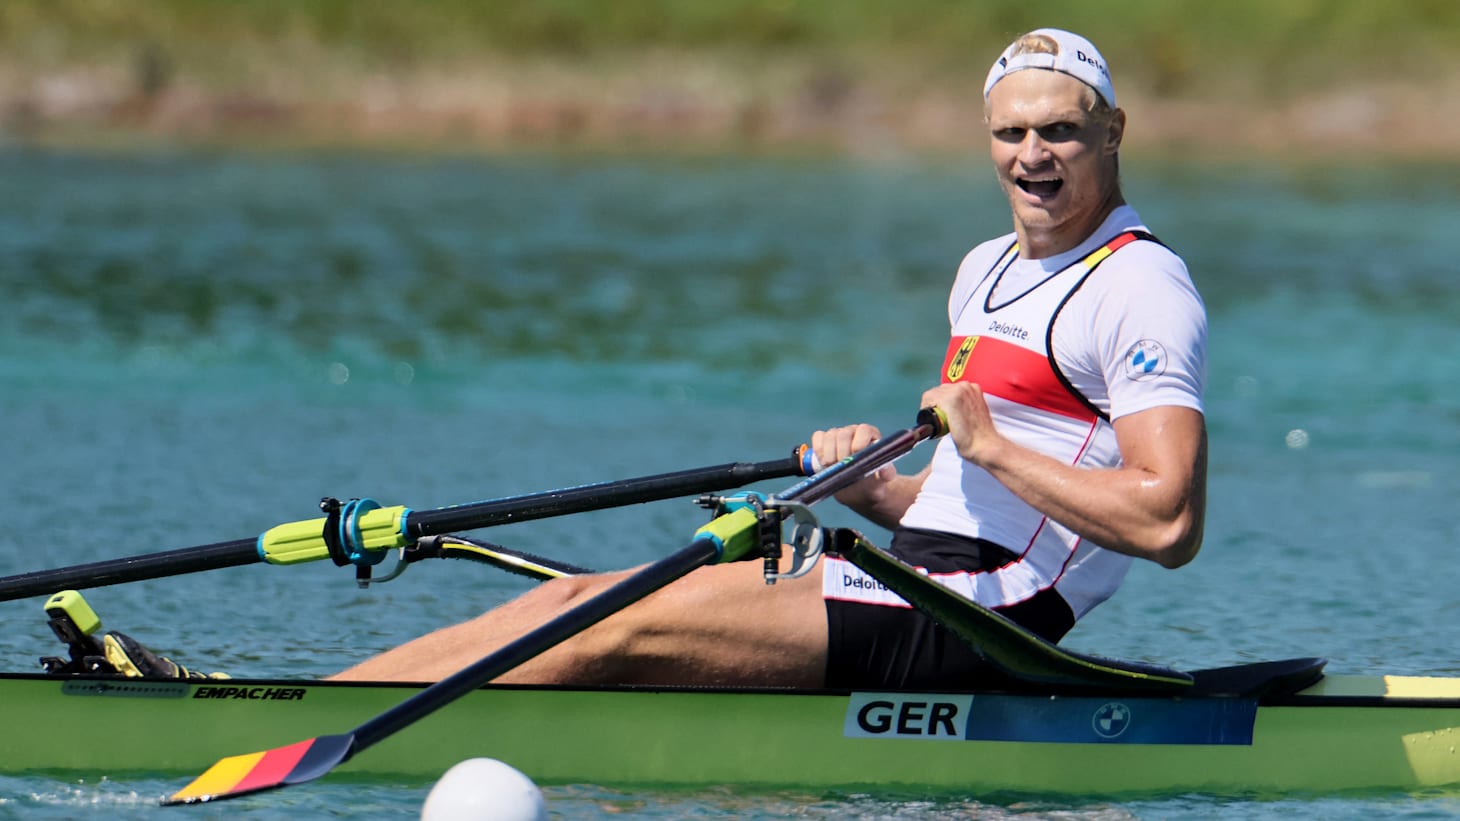 World Rowing Championships 2023 preview Full schedule and how to watch the main Paris 2024 Olympic qualifier